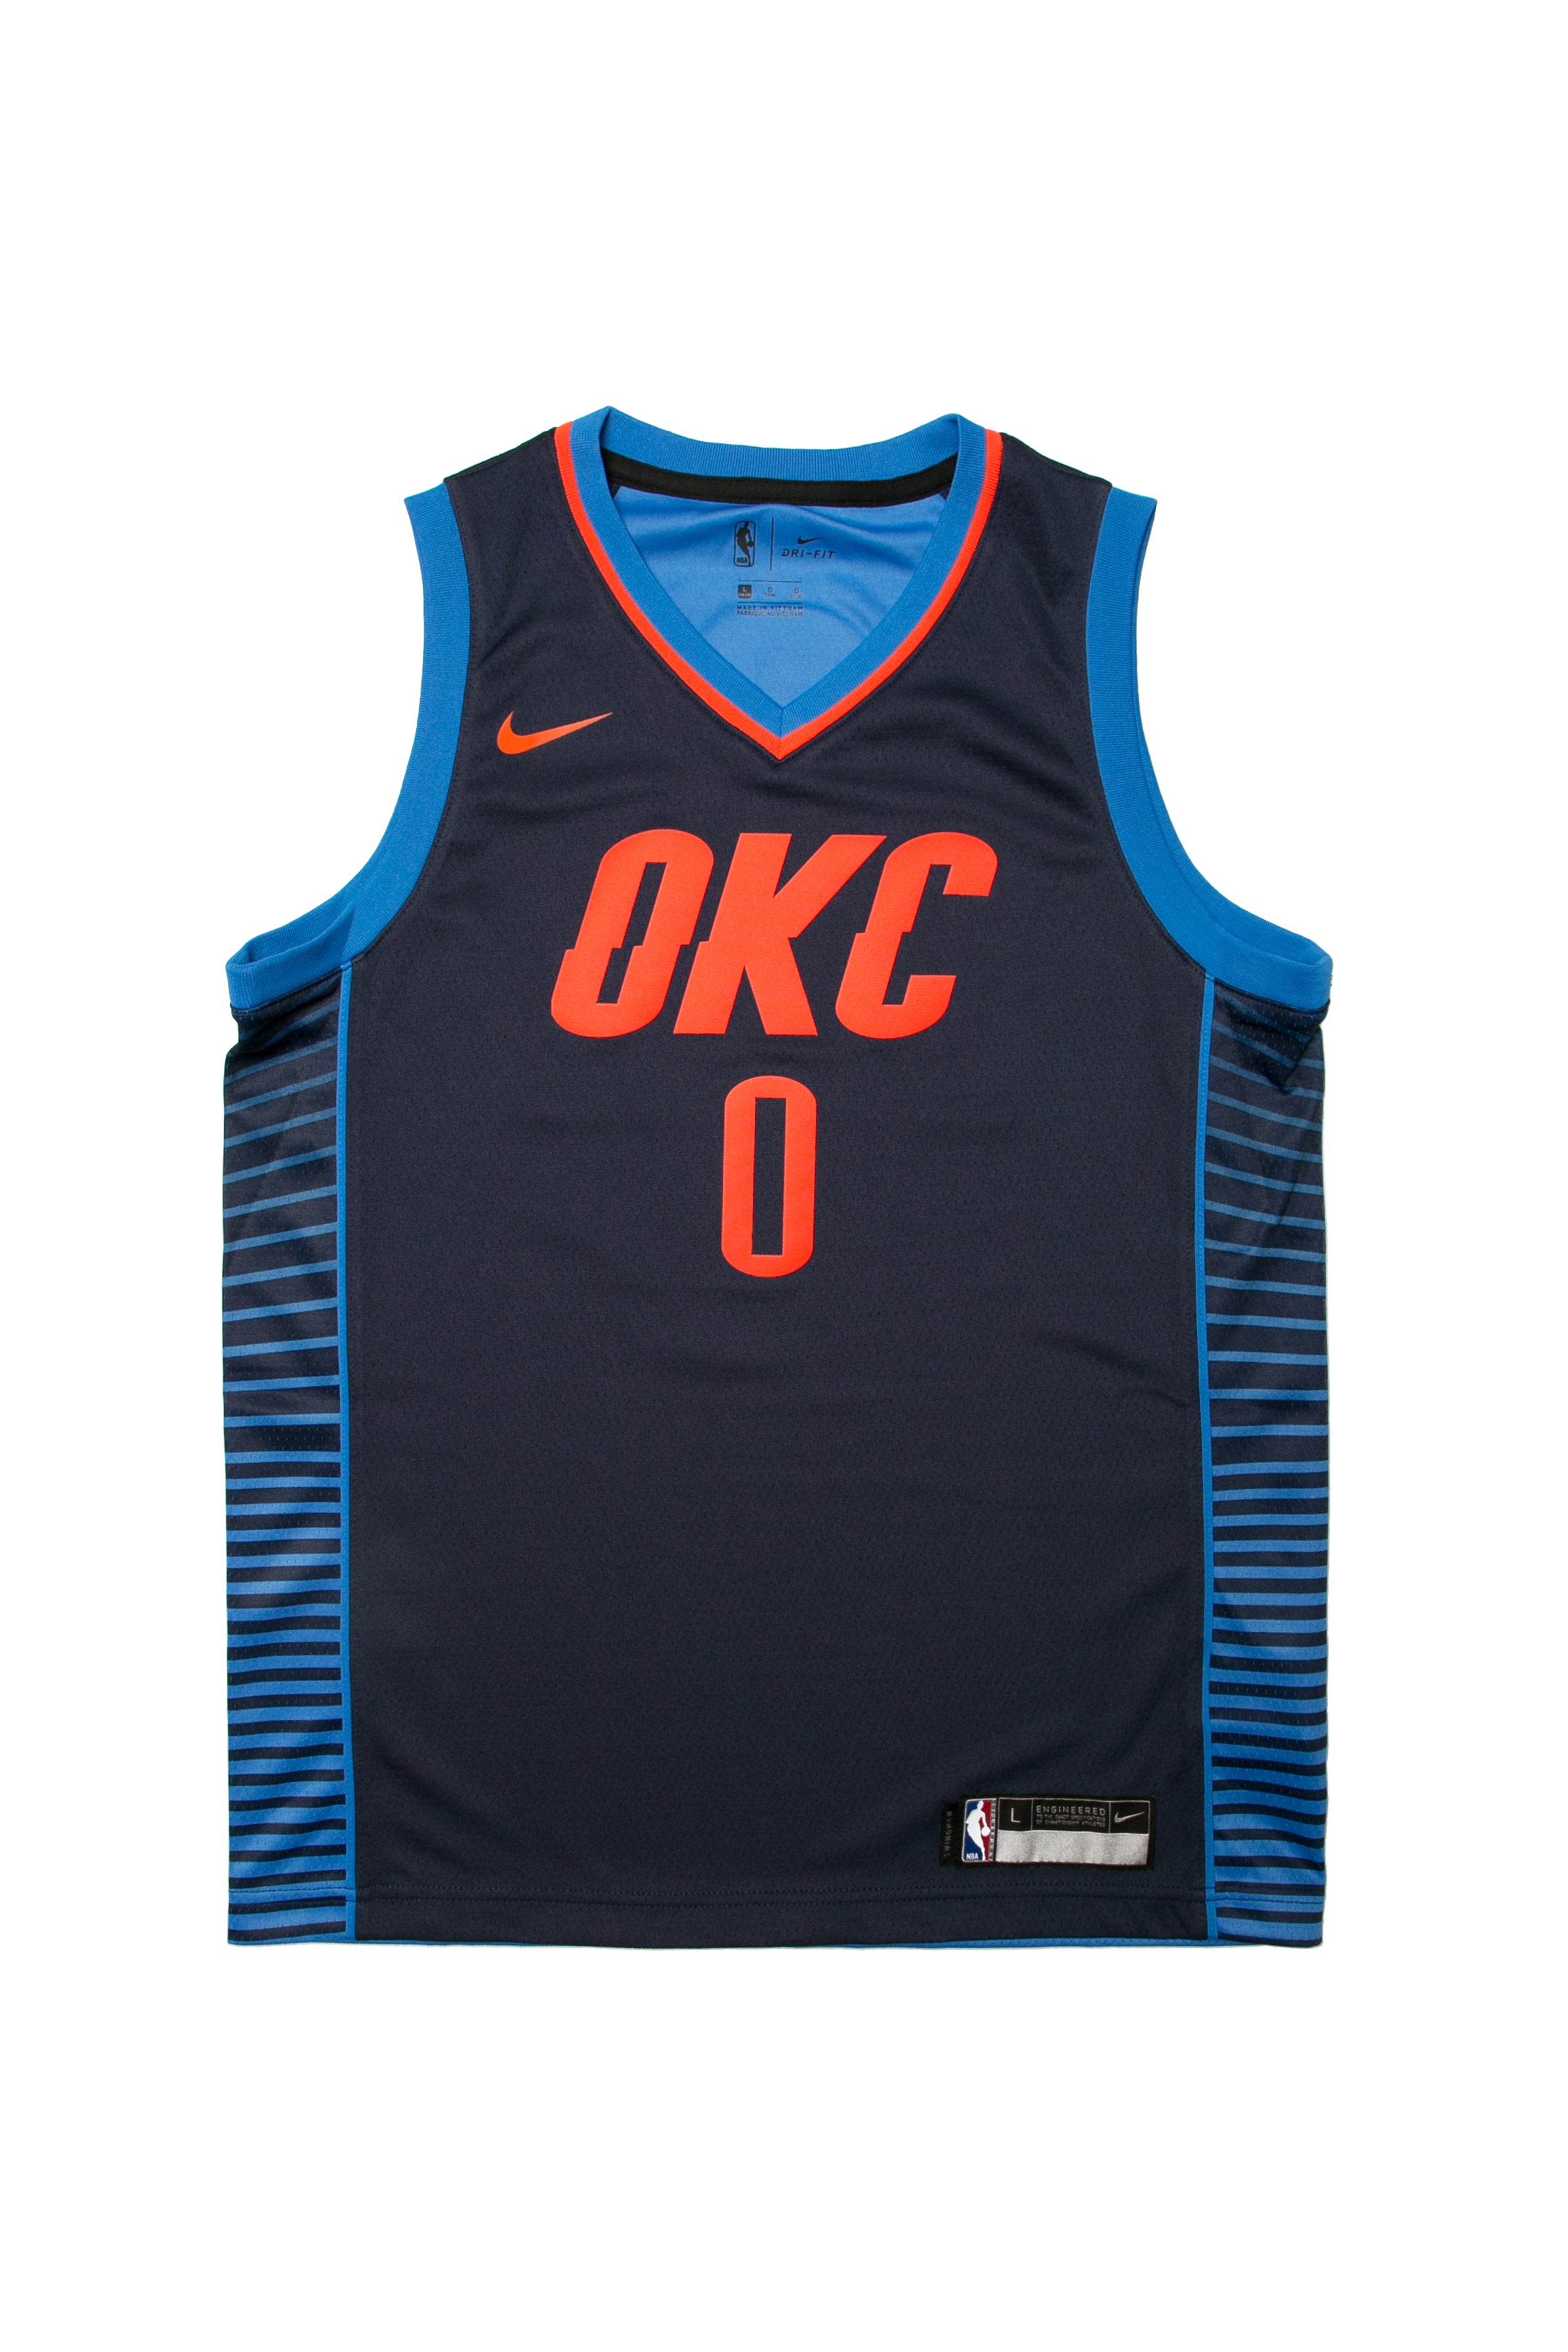 russell westbrook youth jersey